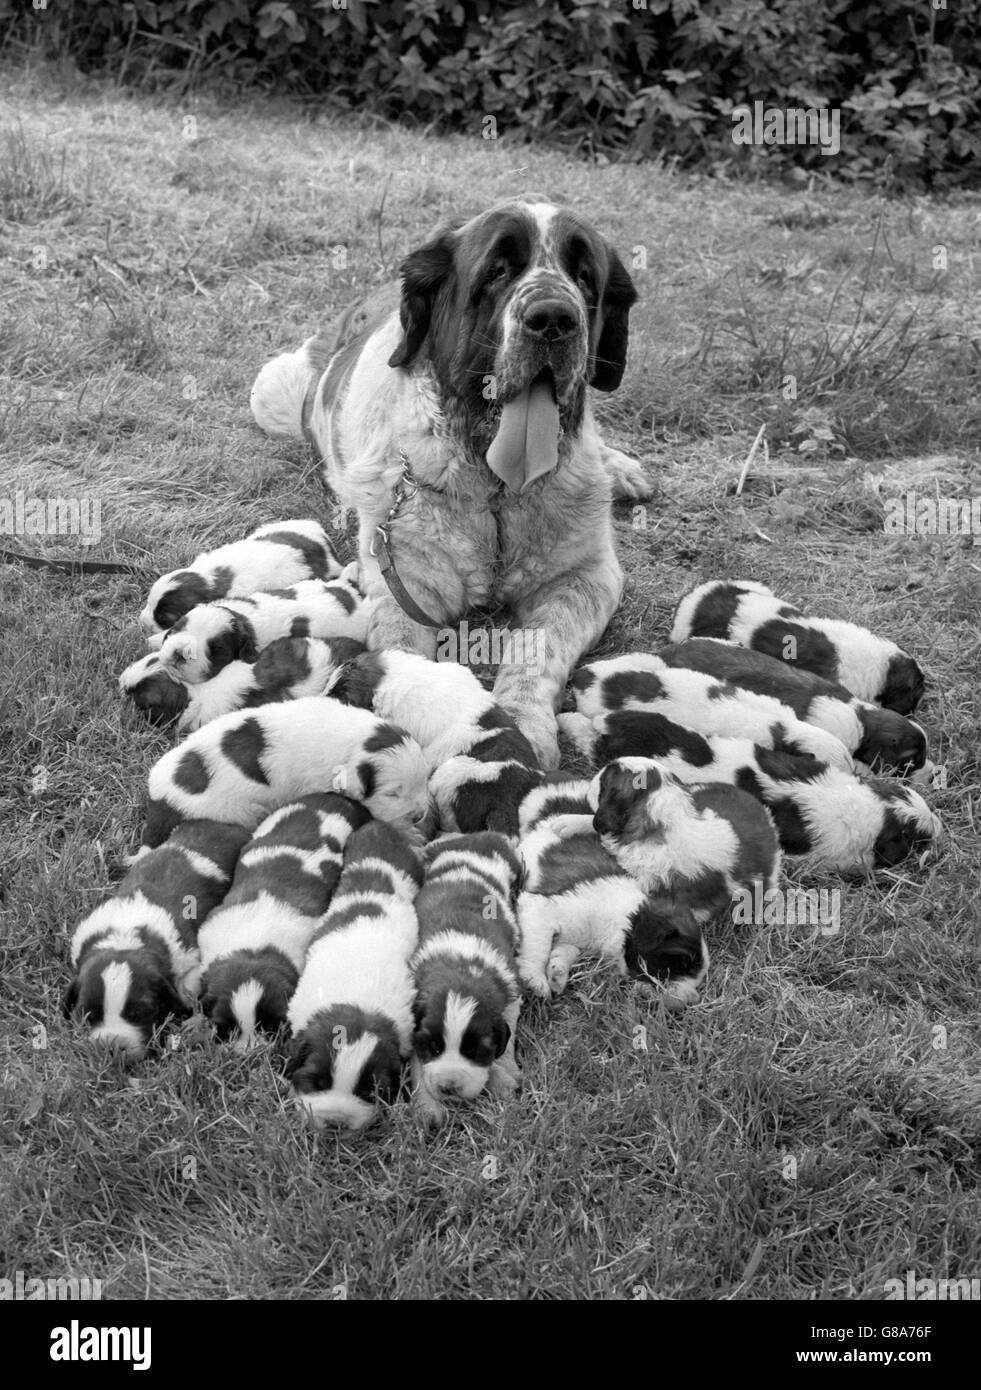 With her fifteen pups cuddled around her, Snowranger Agamemnon - known to all her friends as Tich - has every right to be proud. The St Bernard and her brood are pictured at the Mill Farm Kennels, Stoke Mandeville, Buckinghamshire, where the pups were born. Stock Photo